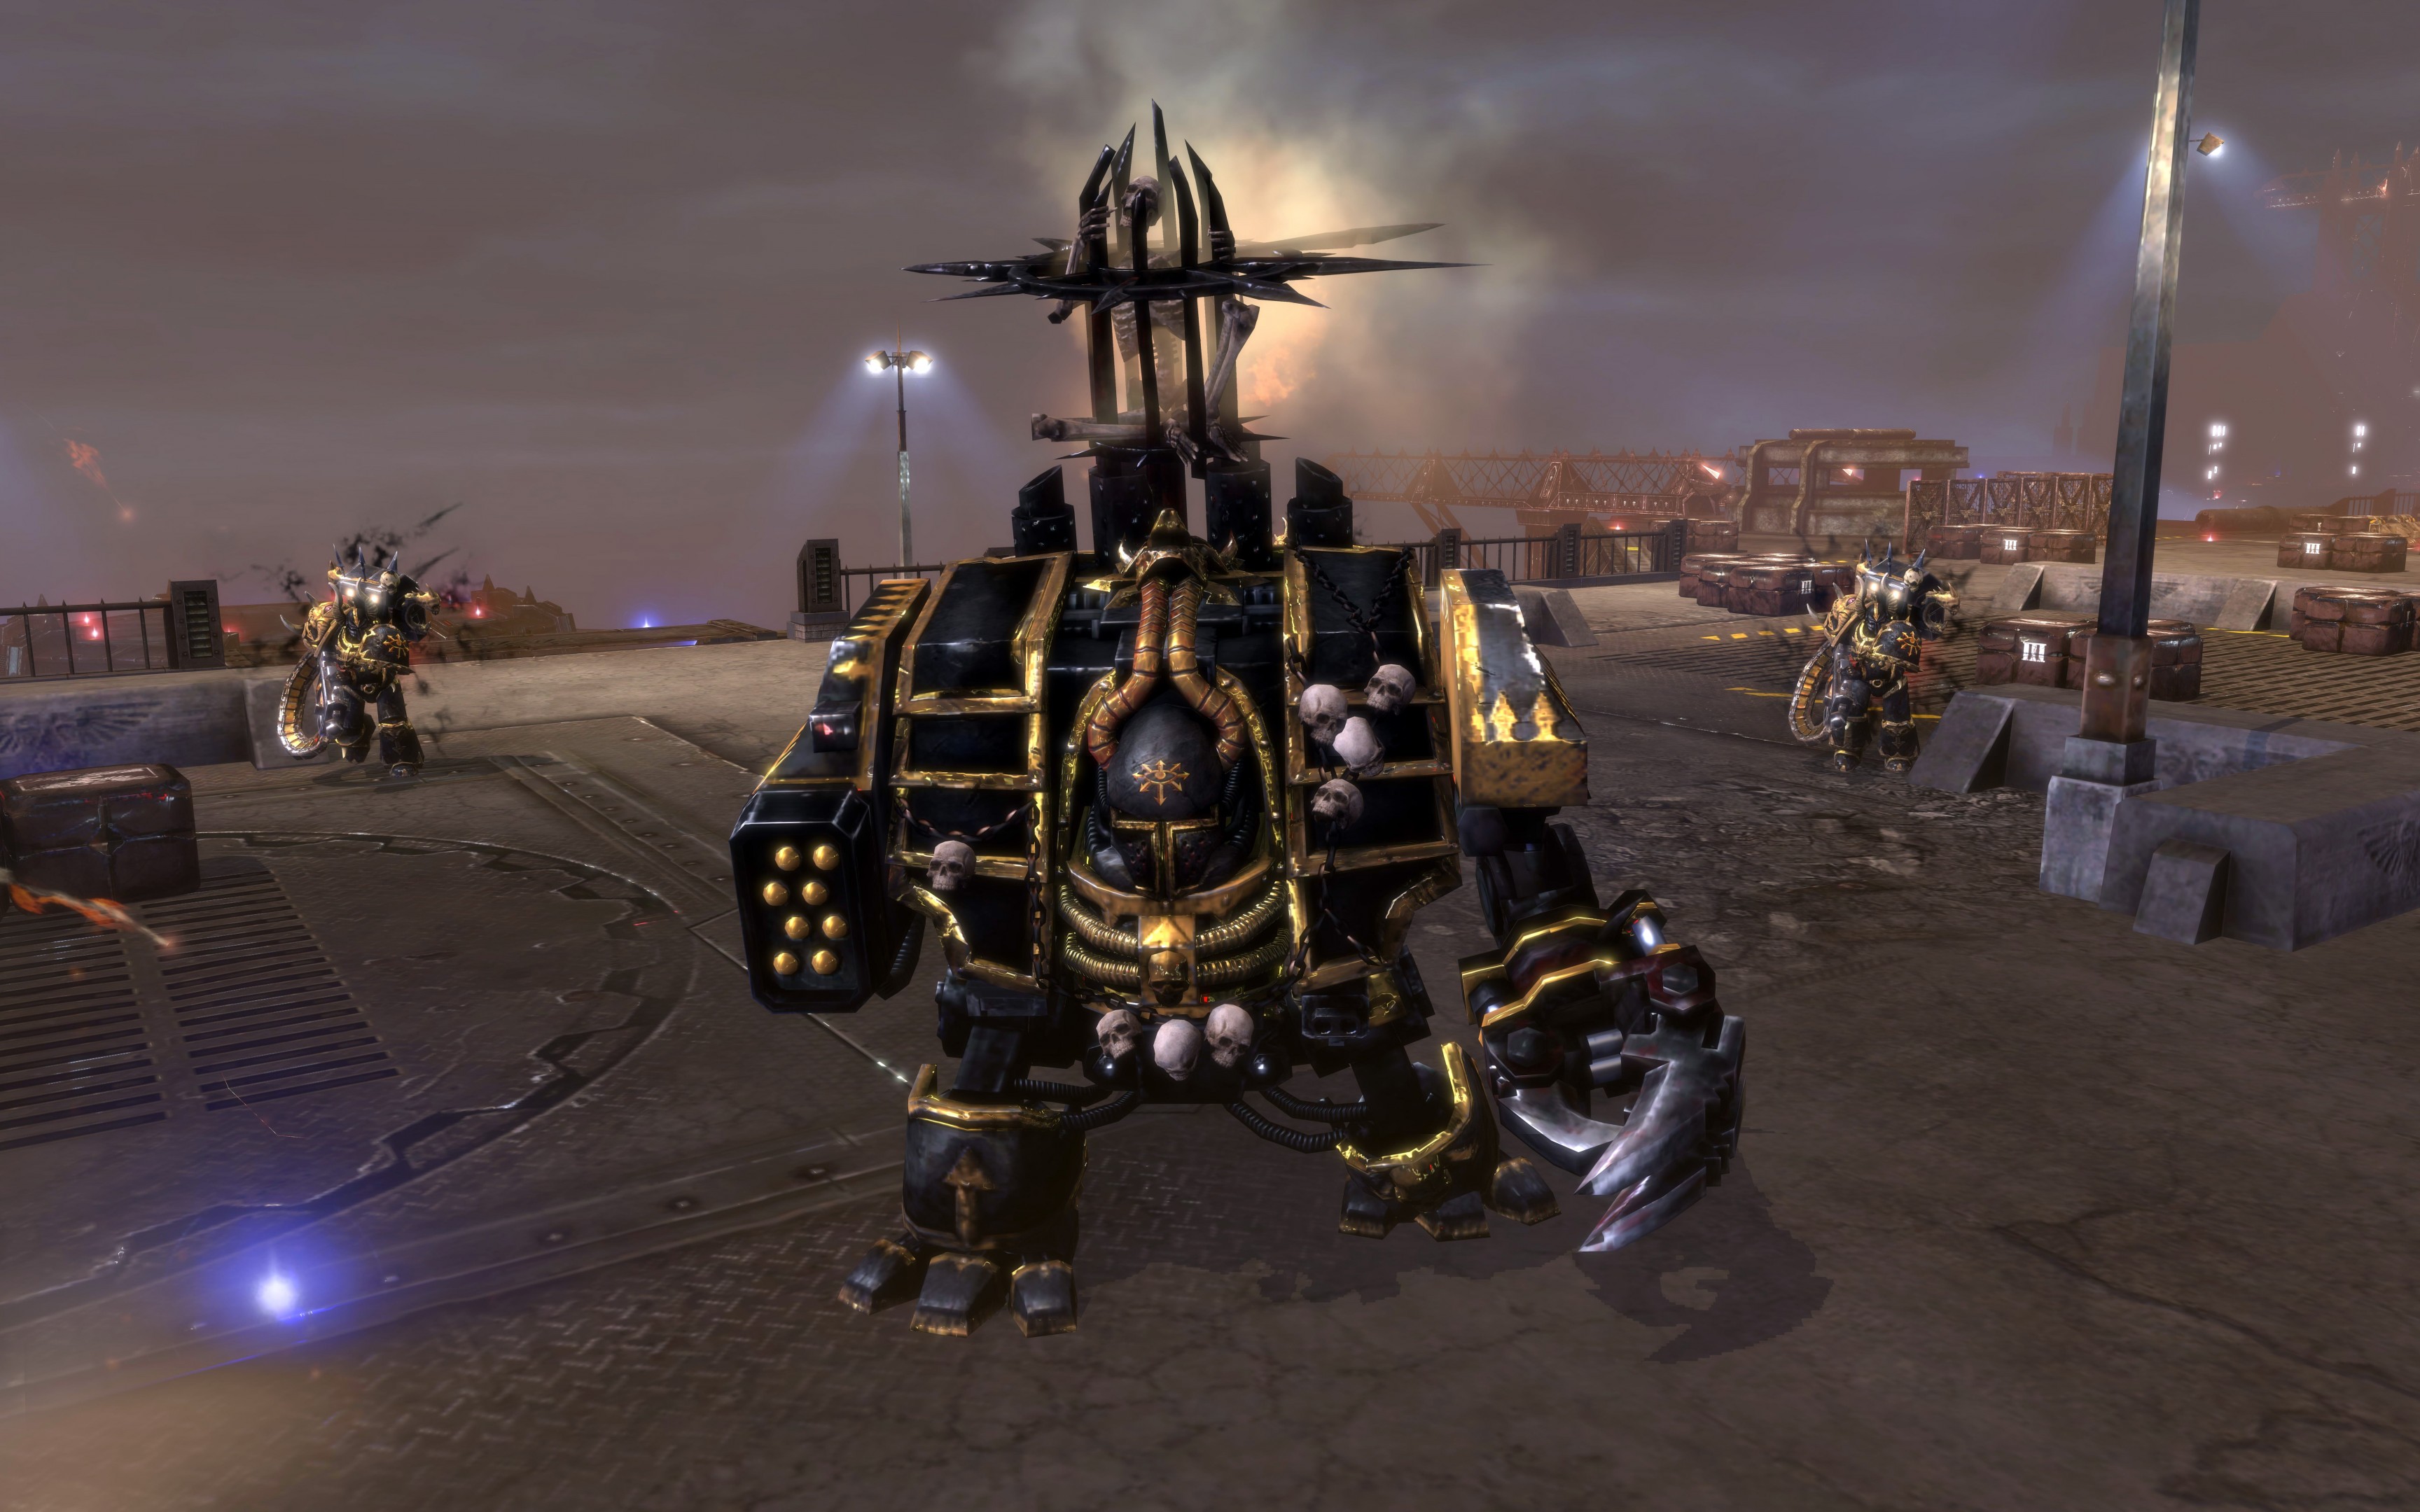 Warhammer: Chaos And Conquest for mac instal